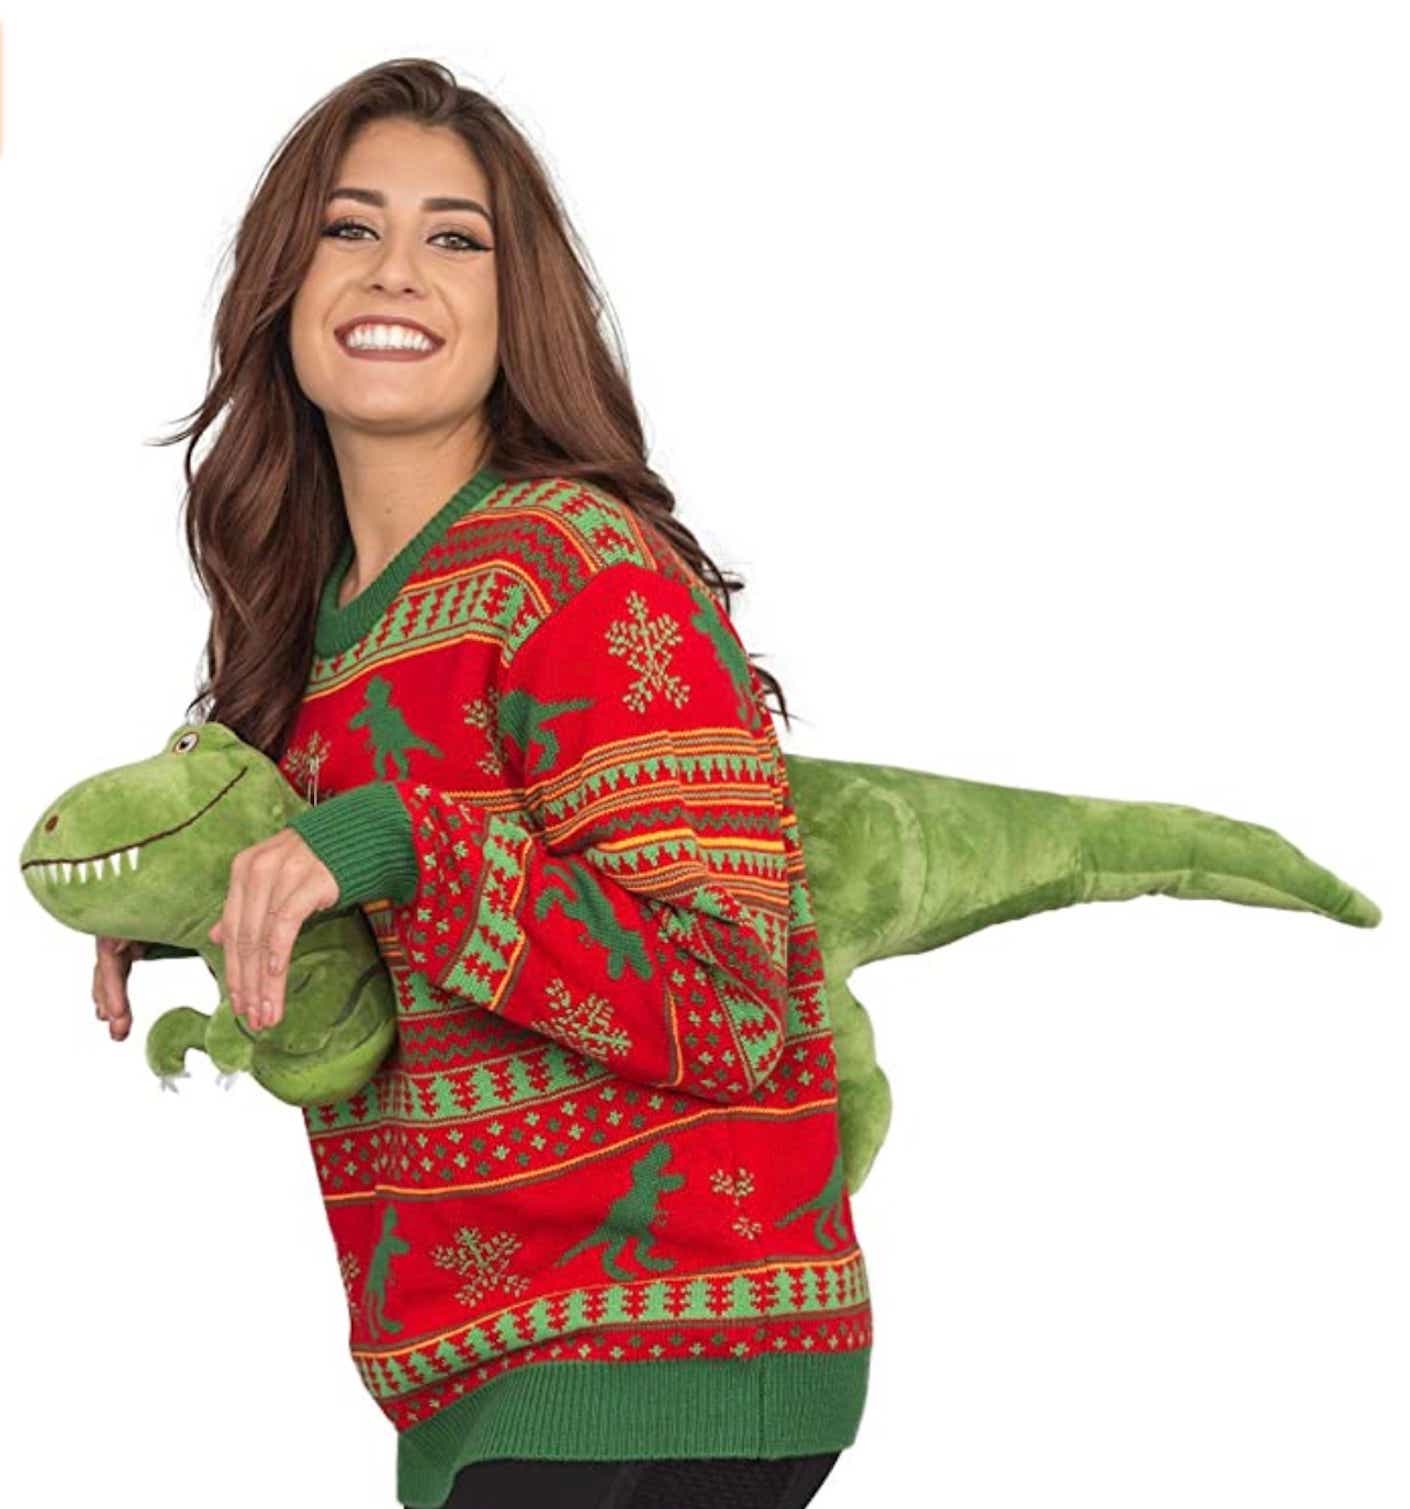 Funny holiday sweater with dinosaurs